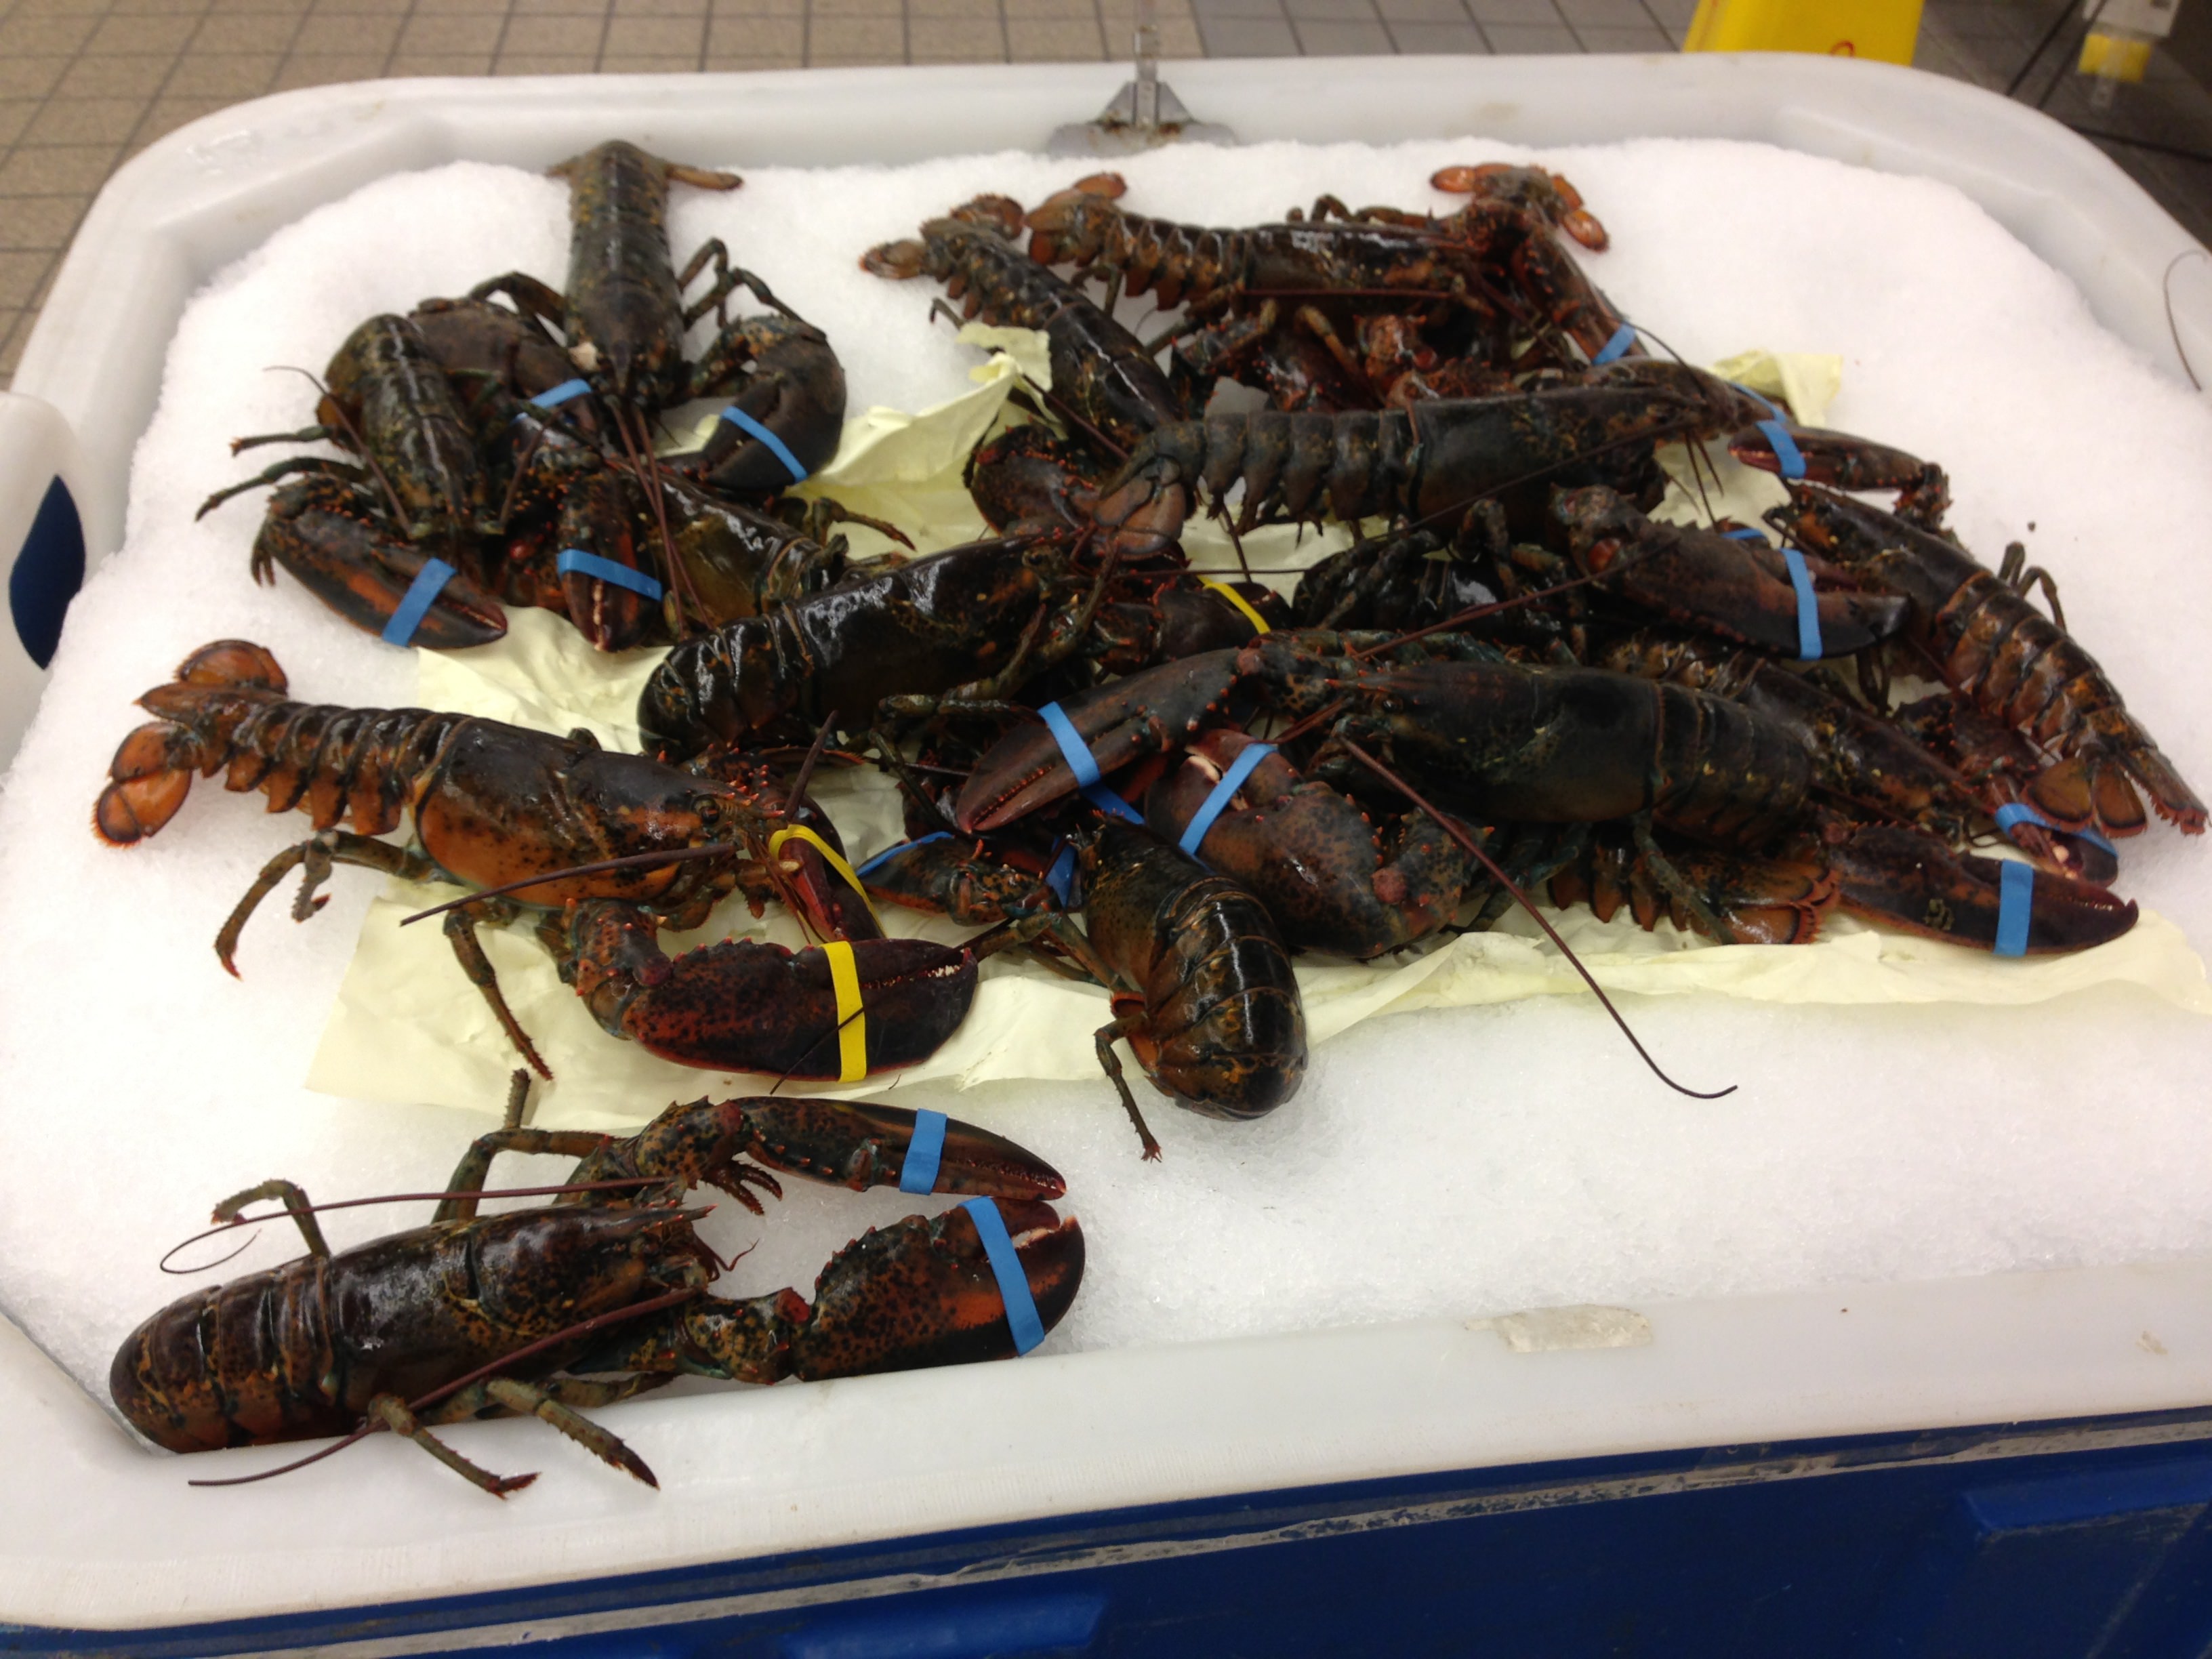 Lobsters On deck make for a great Father’s Day BBQ!